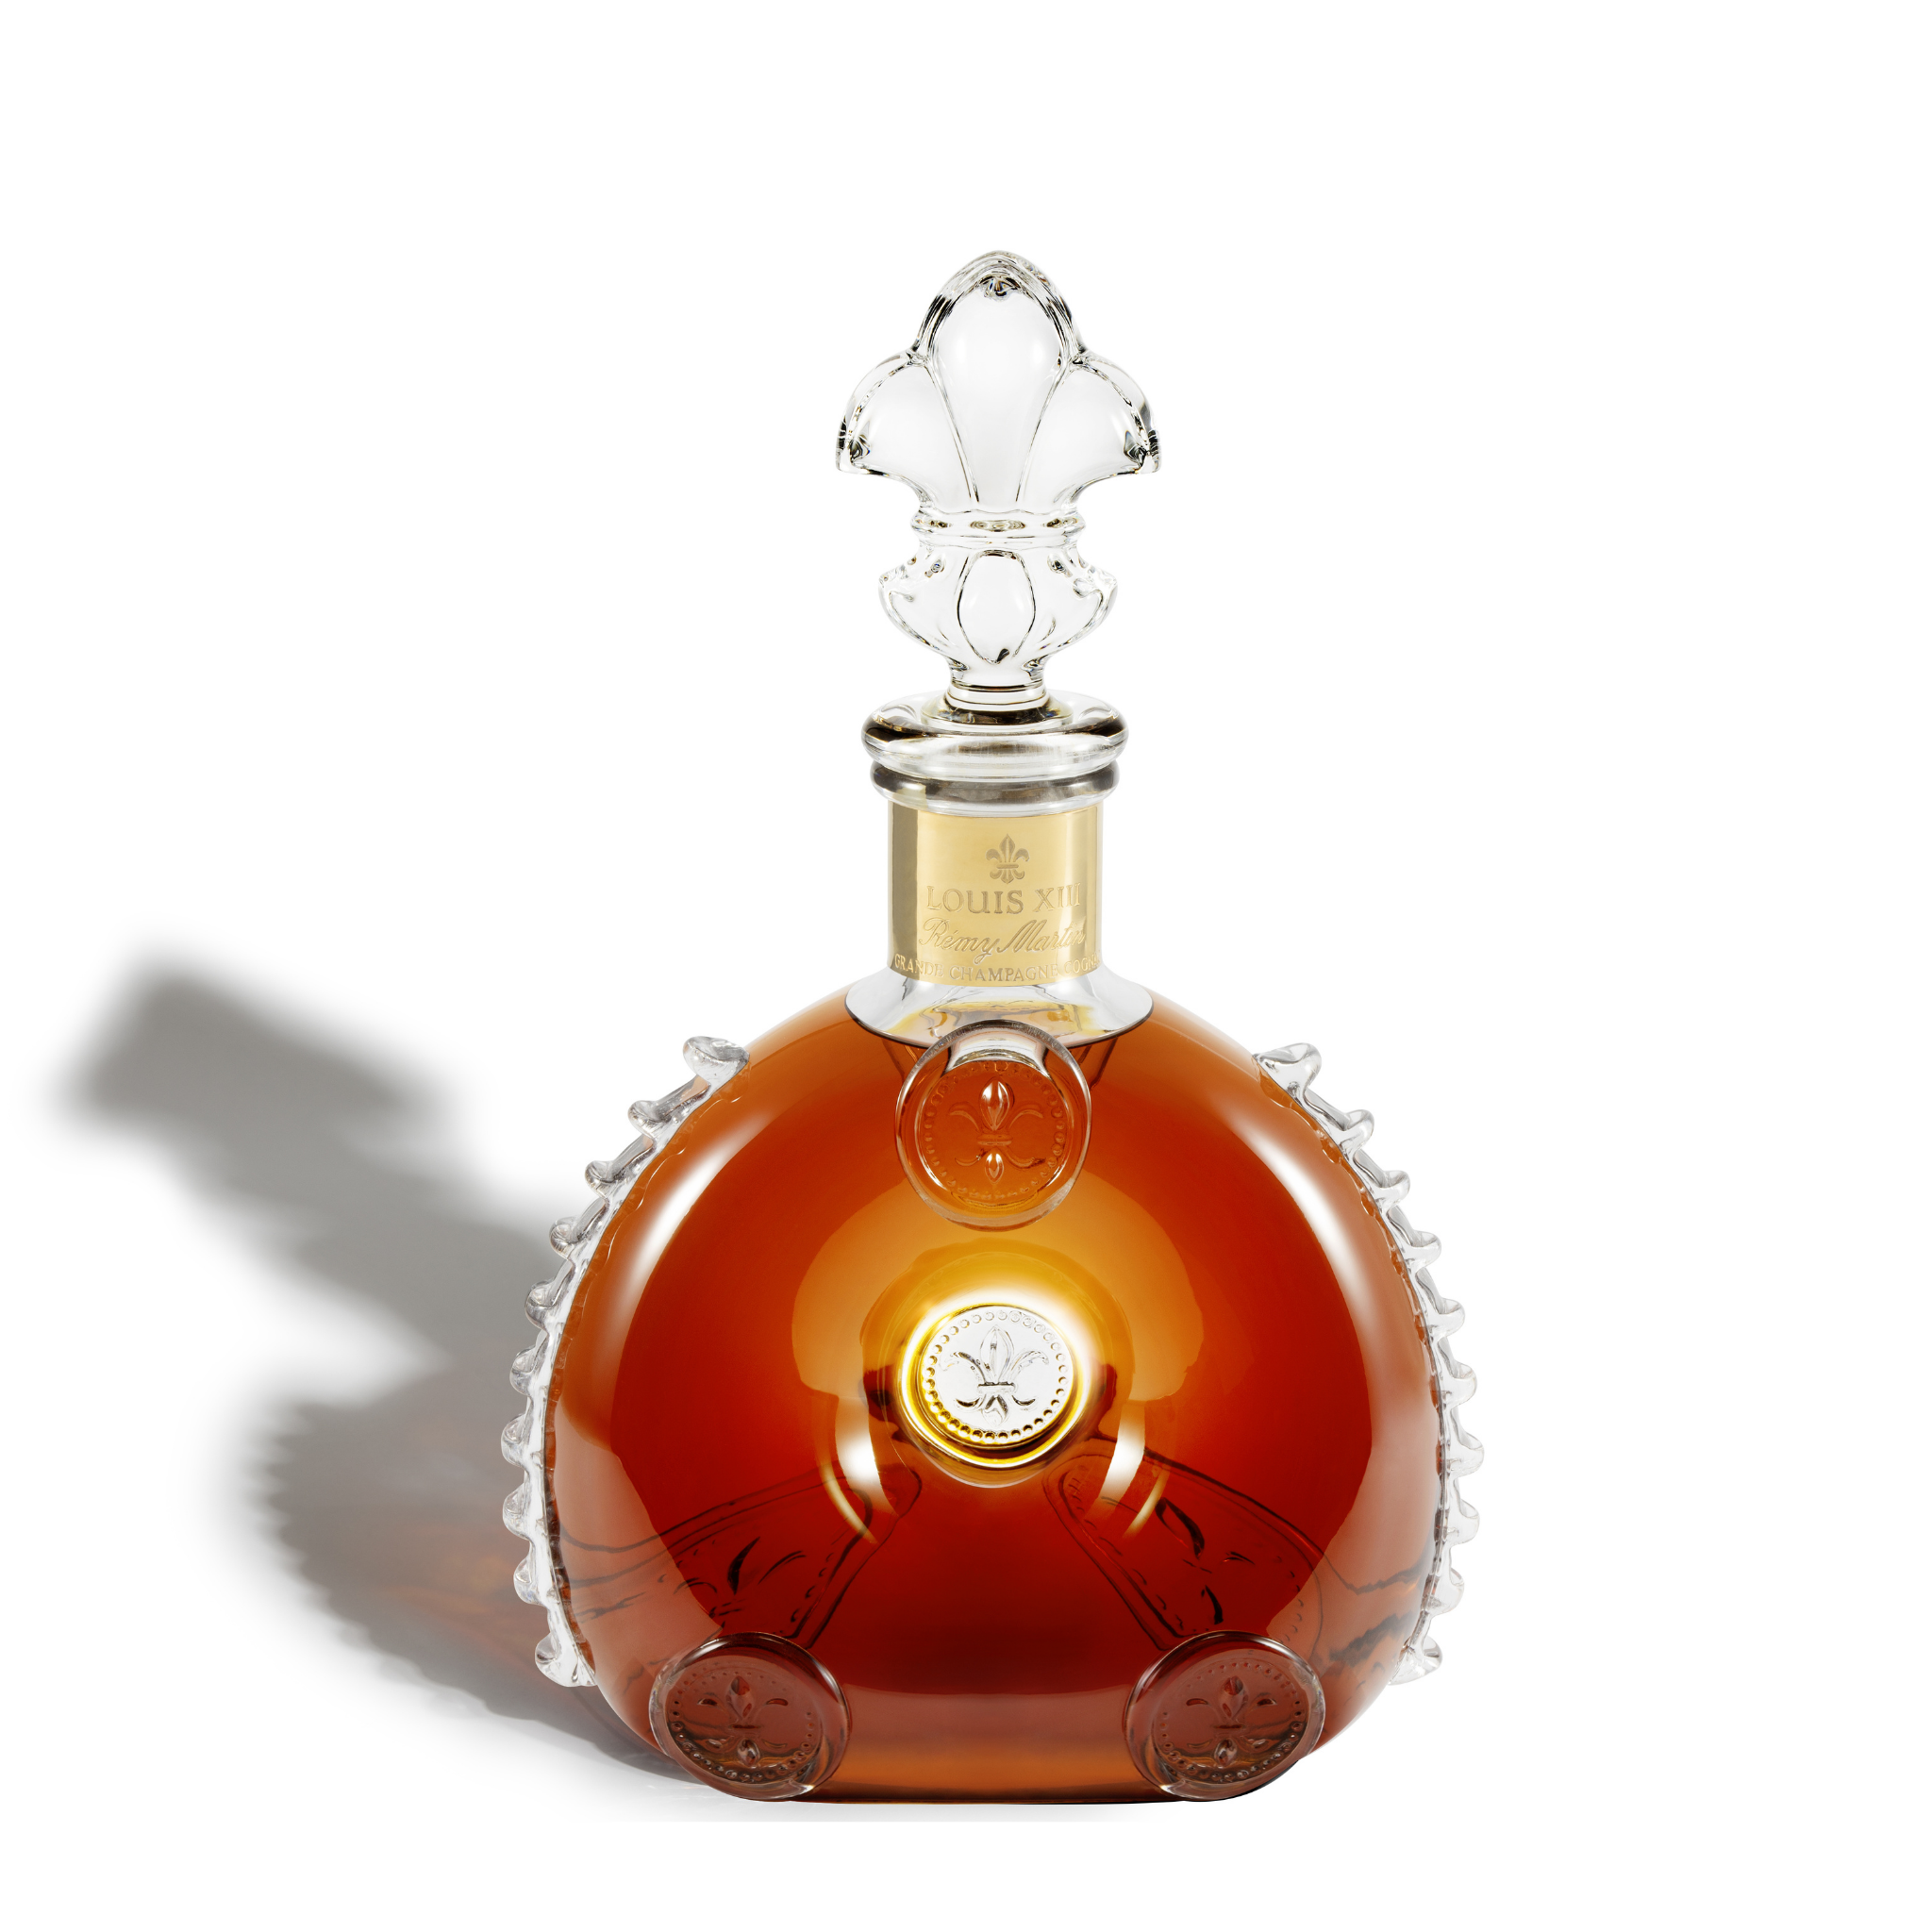 Rémy Martin Louis XIII - Magnum - Old Presentation : The Whisky Exchange